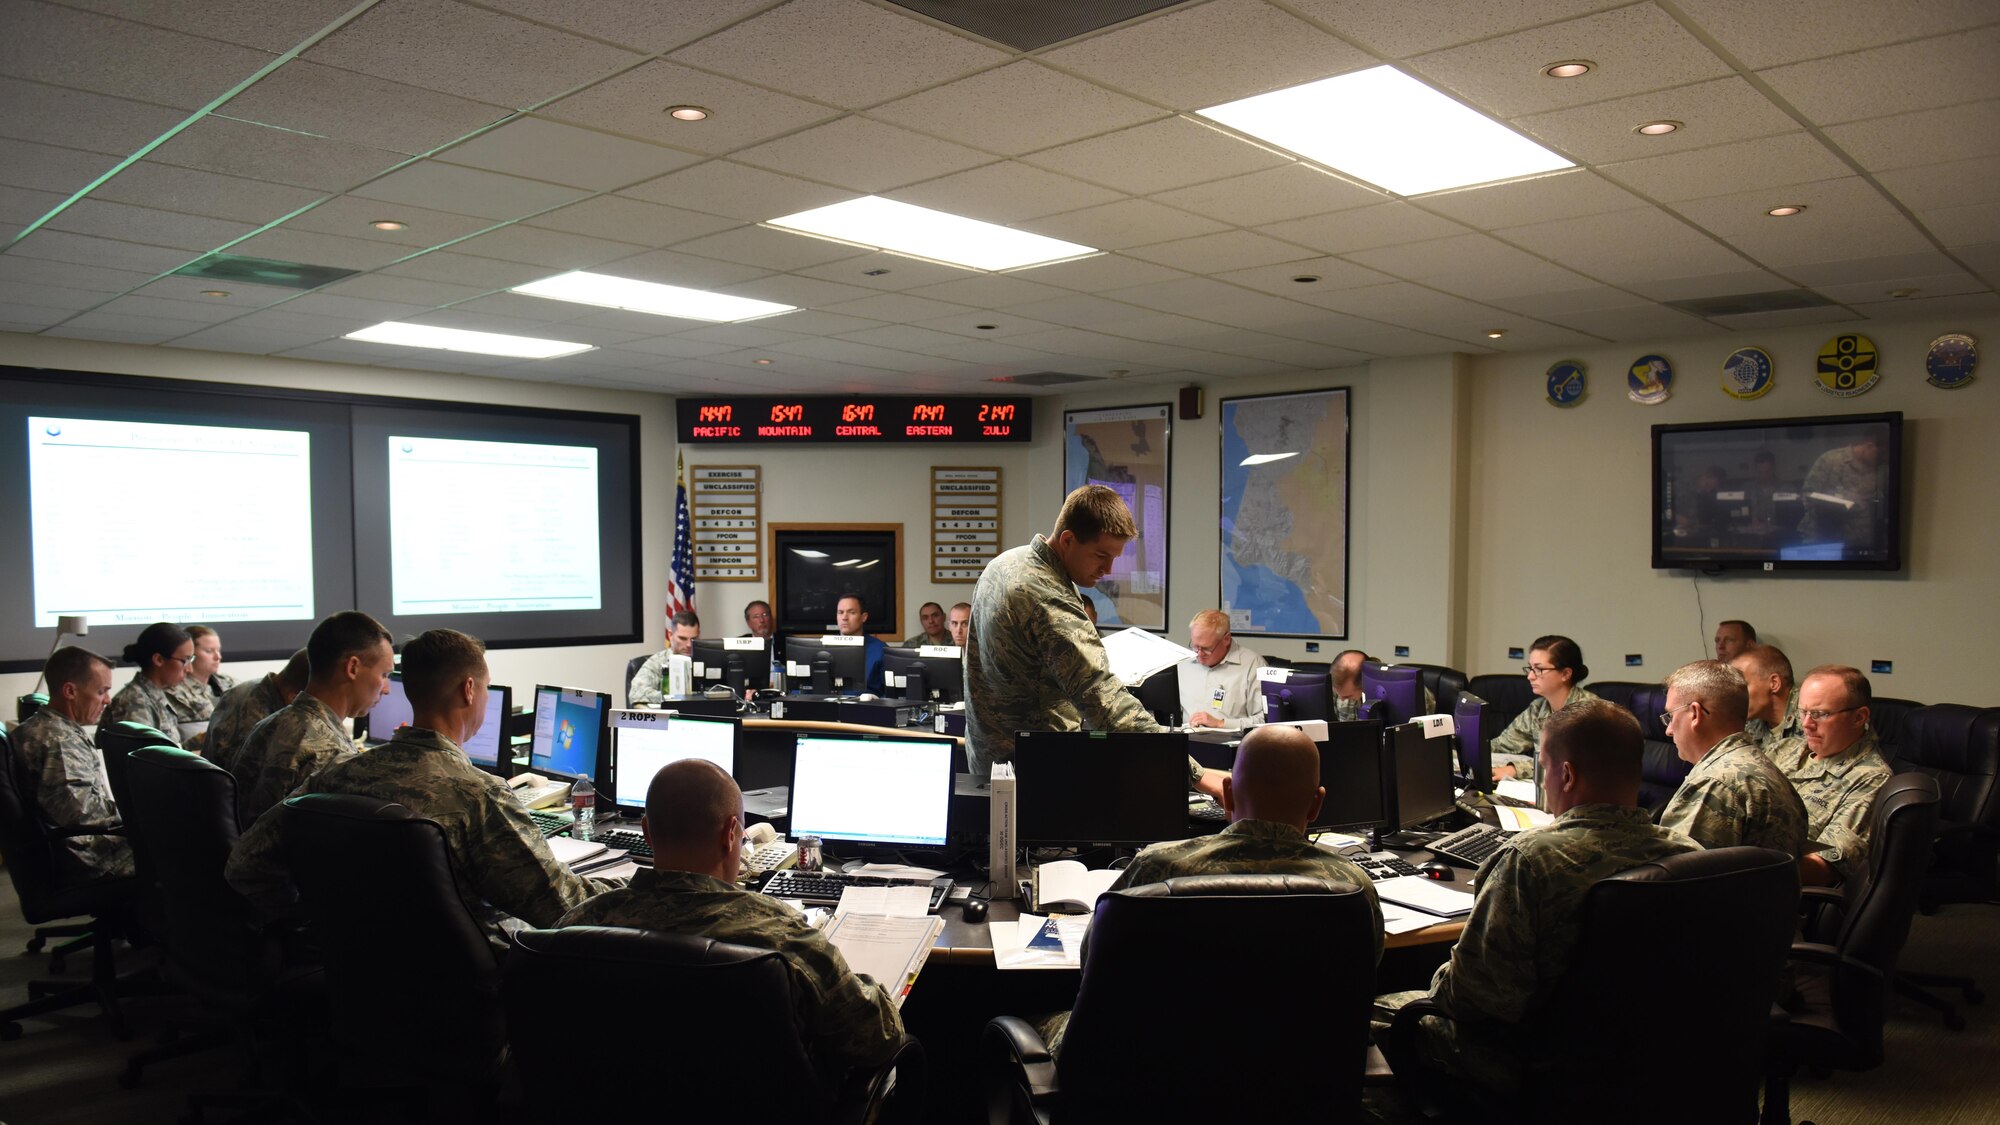 Maj. Matt Hale, 30th Operations Support Squadron operations officer, briefs the Crises Action Team during the recent tabletop exercise, Aug. 22, 2016, Vandenberg Air Force Base, Calif. While a normal base exercise for disaster response can take days, or even weeks, the most recent exercise took place in 90 minutes and only included a small fraction of the base; the CAT, the Emergency Operations Center and the launch team checklists were the primary focus. (U.S. Air Force photo by Senior Airman Ian Dudley/Released)